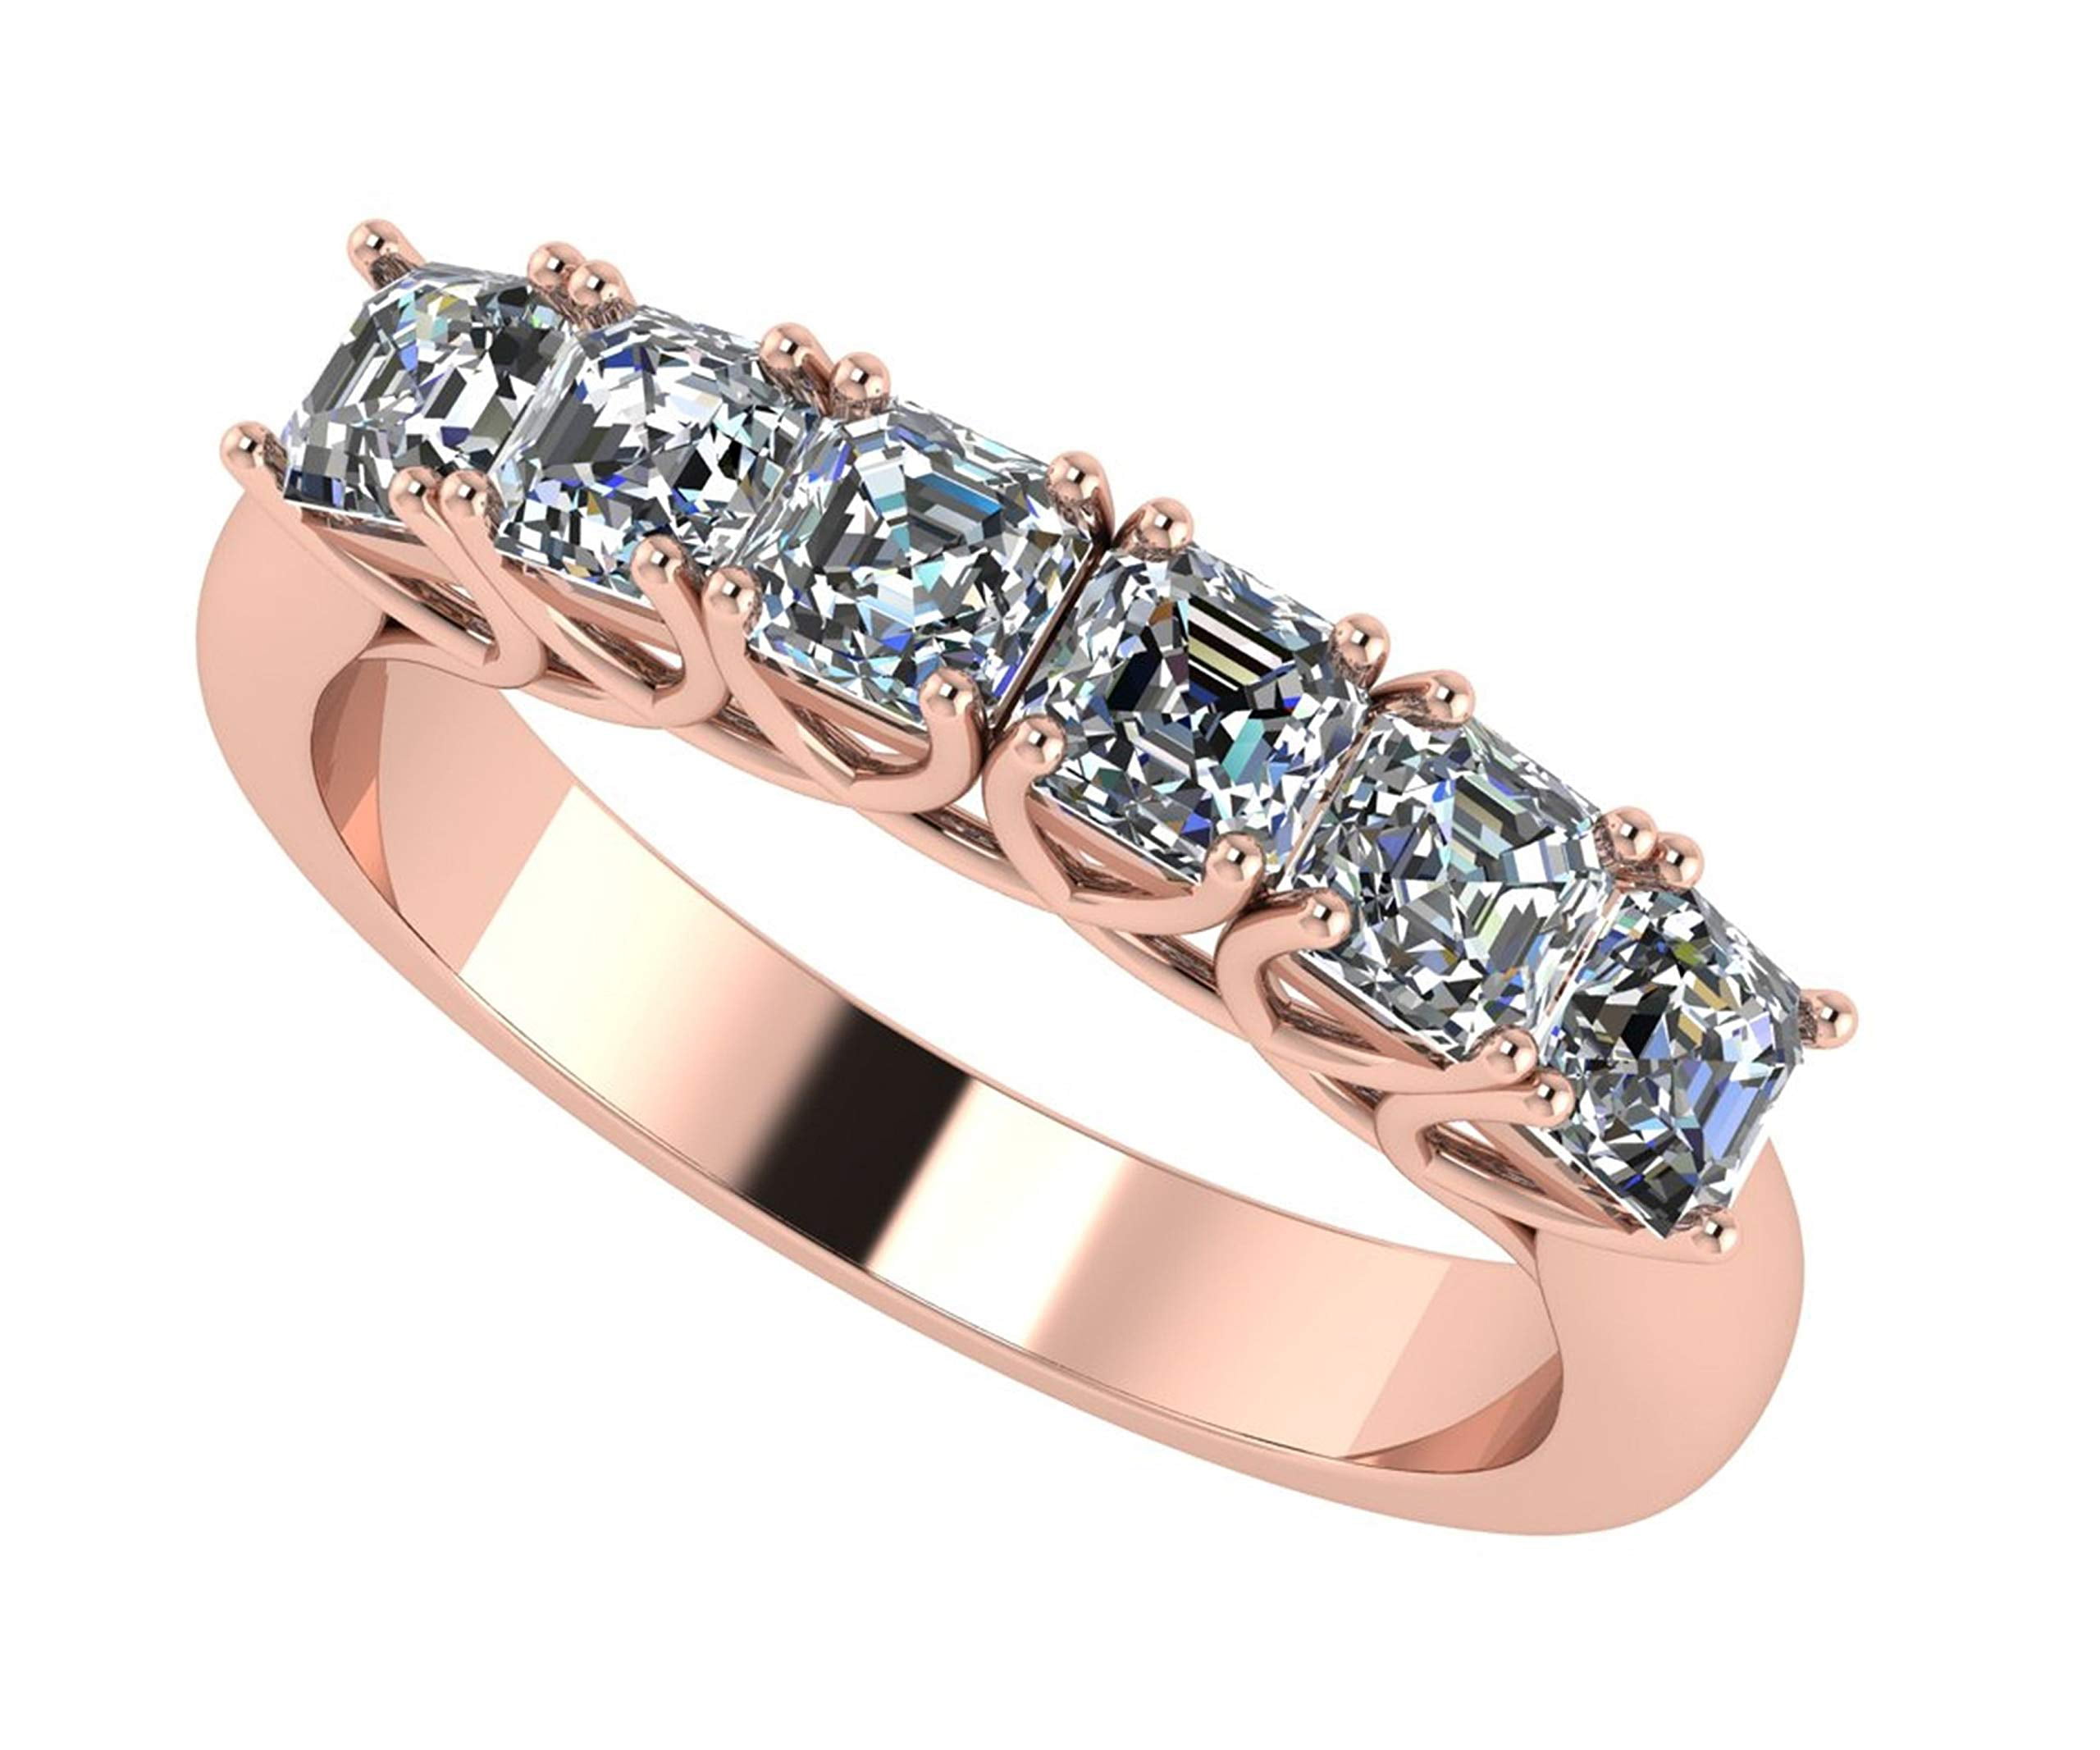 Details about   SIZE 10.5-18kt Rose Gold Wedding Band 2 mm Wide Half Round Ultra-Light Ring 